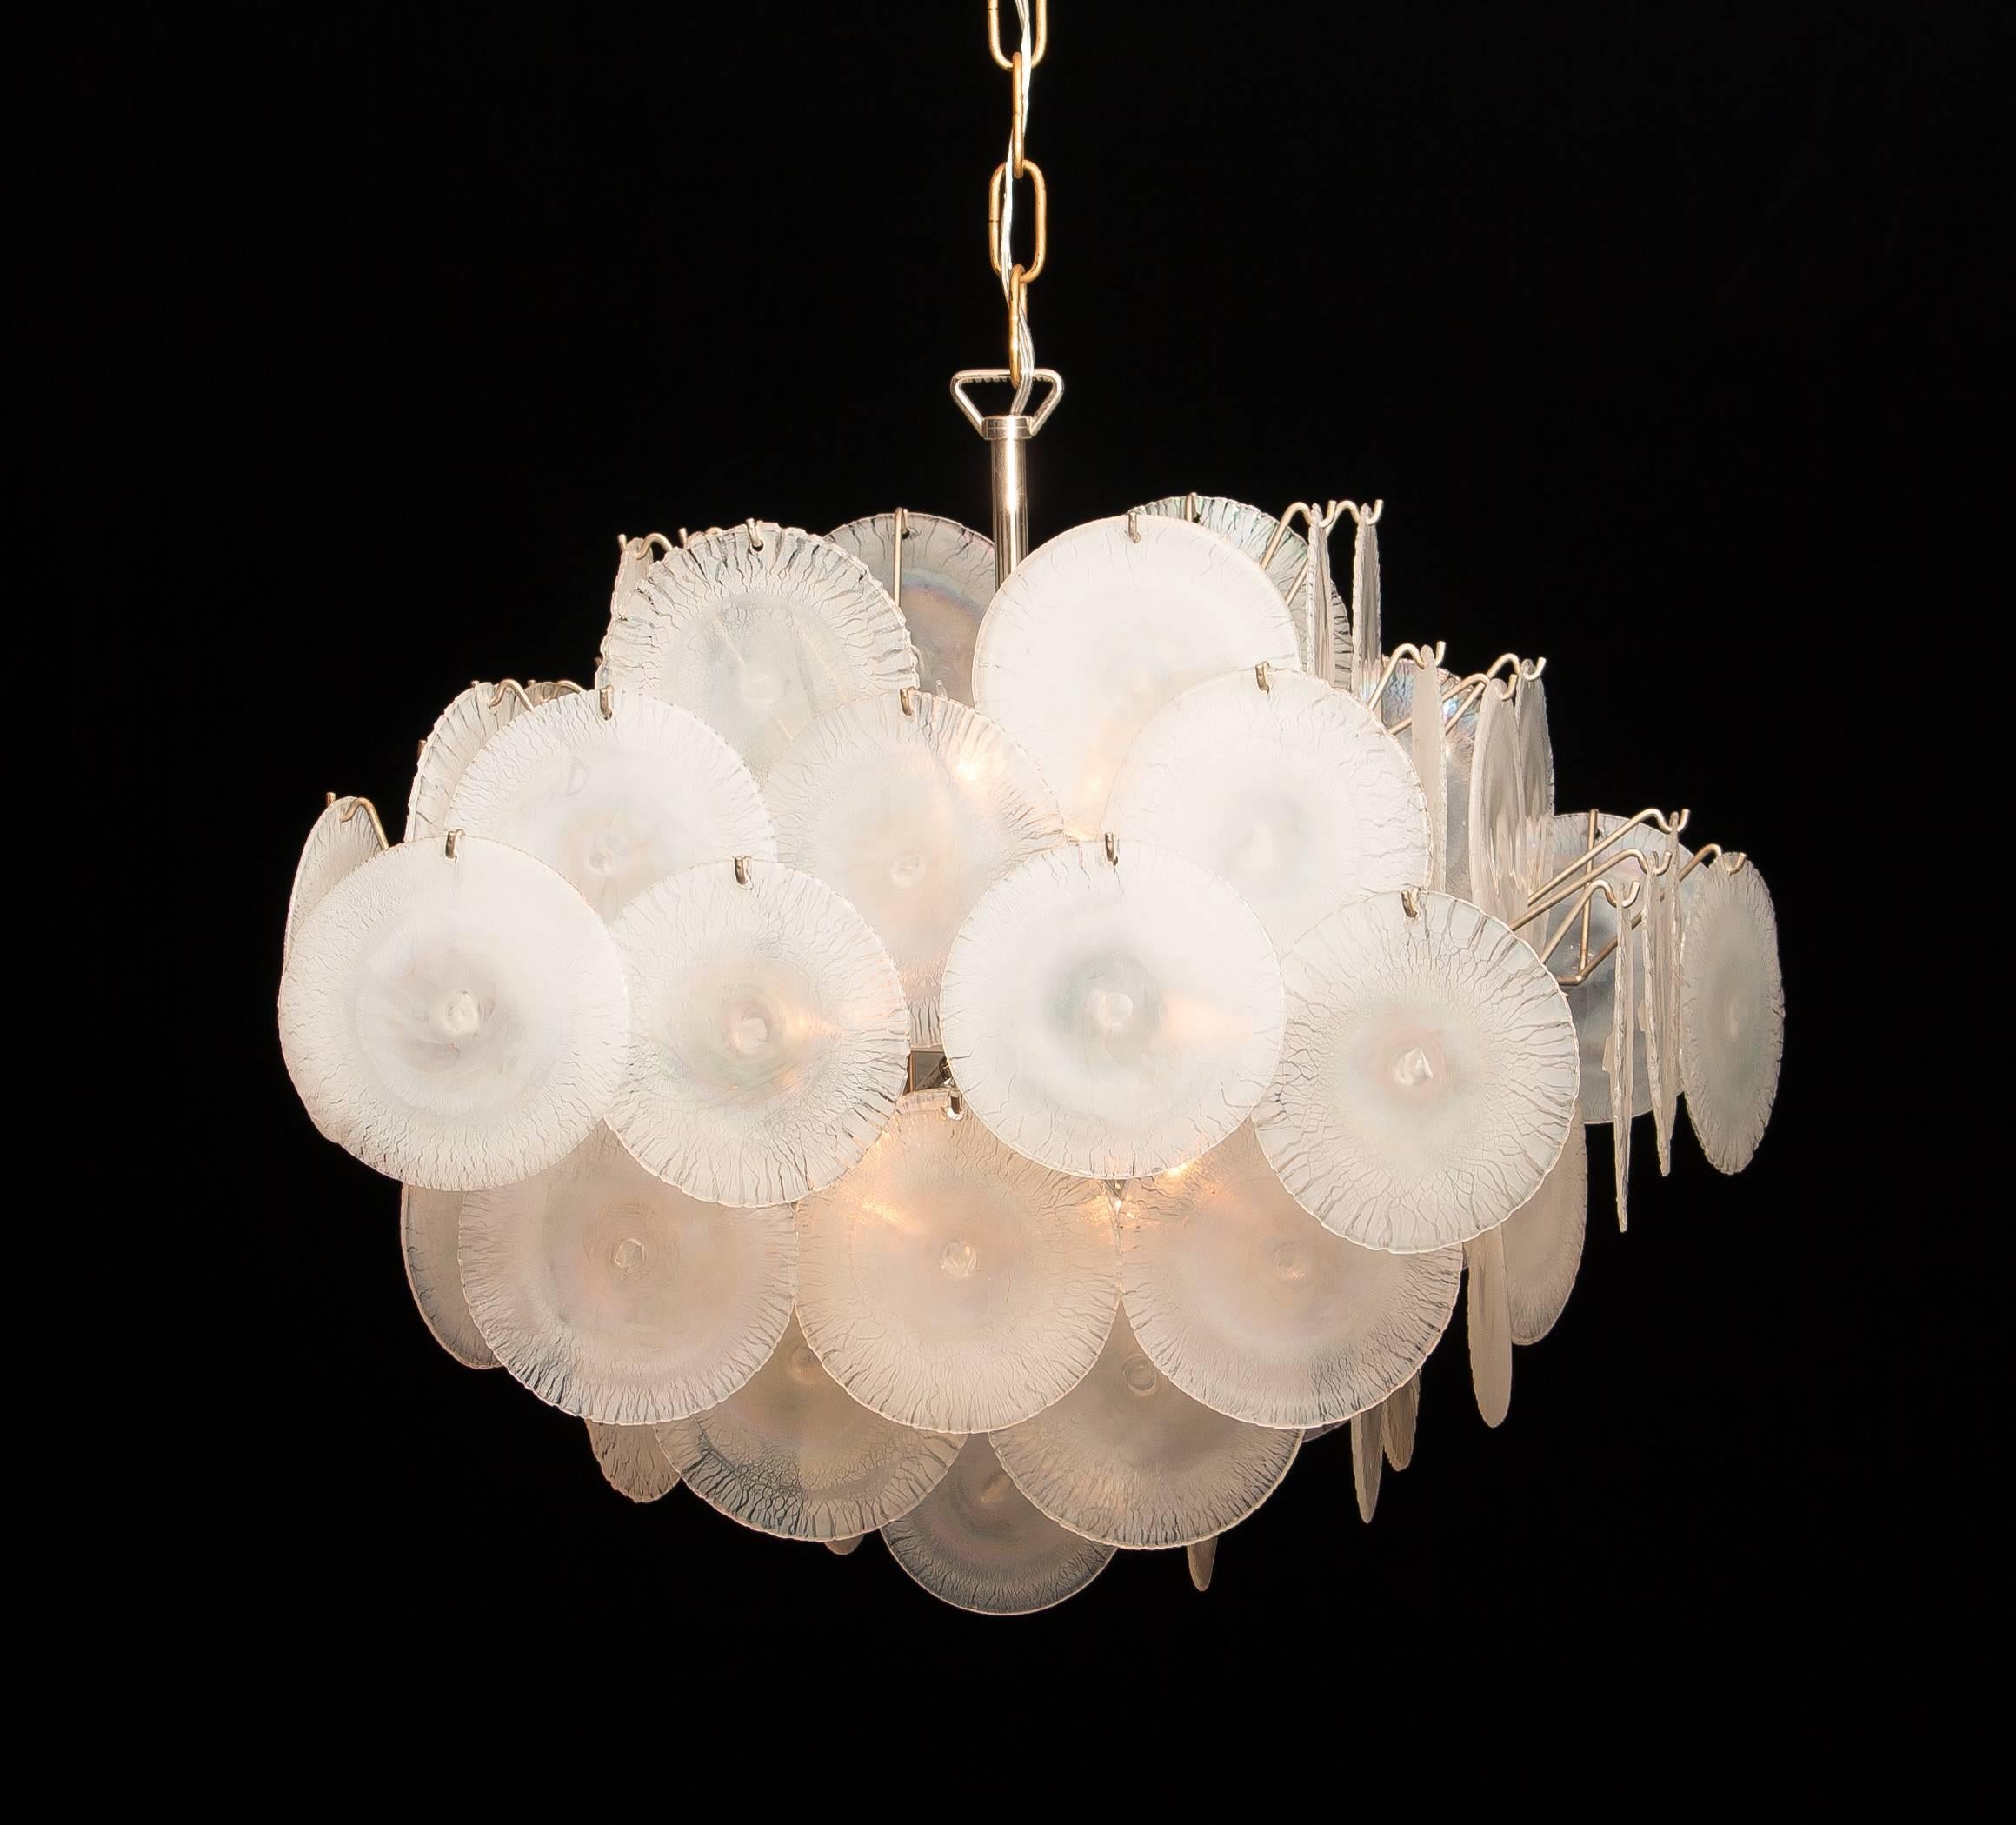 Set of Two Gino Vistosi Chandeliers with White or Pearl Murano Crystal Discs 10